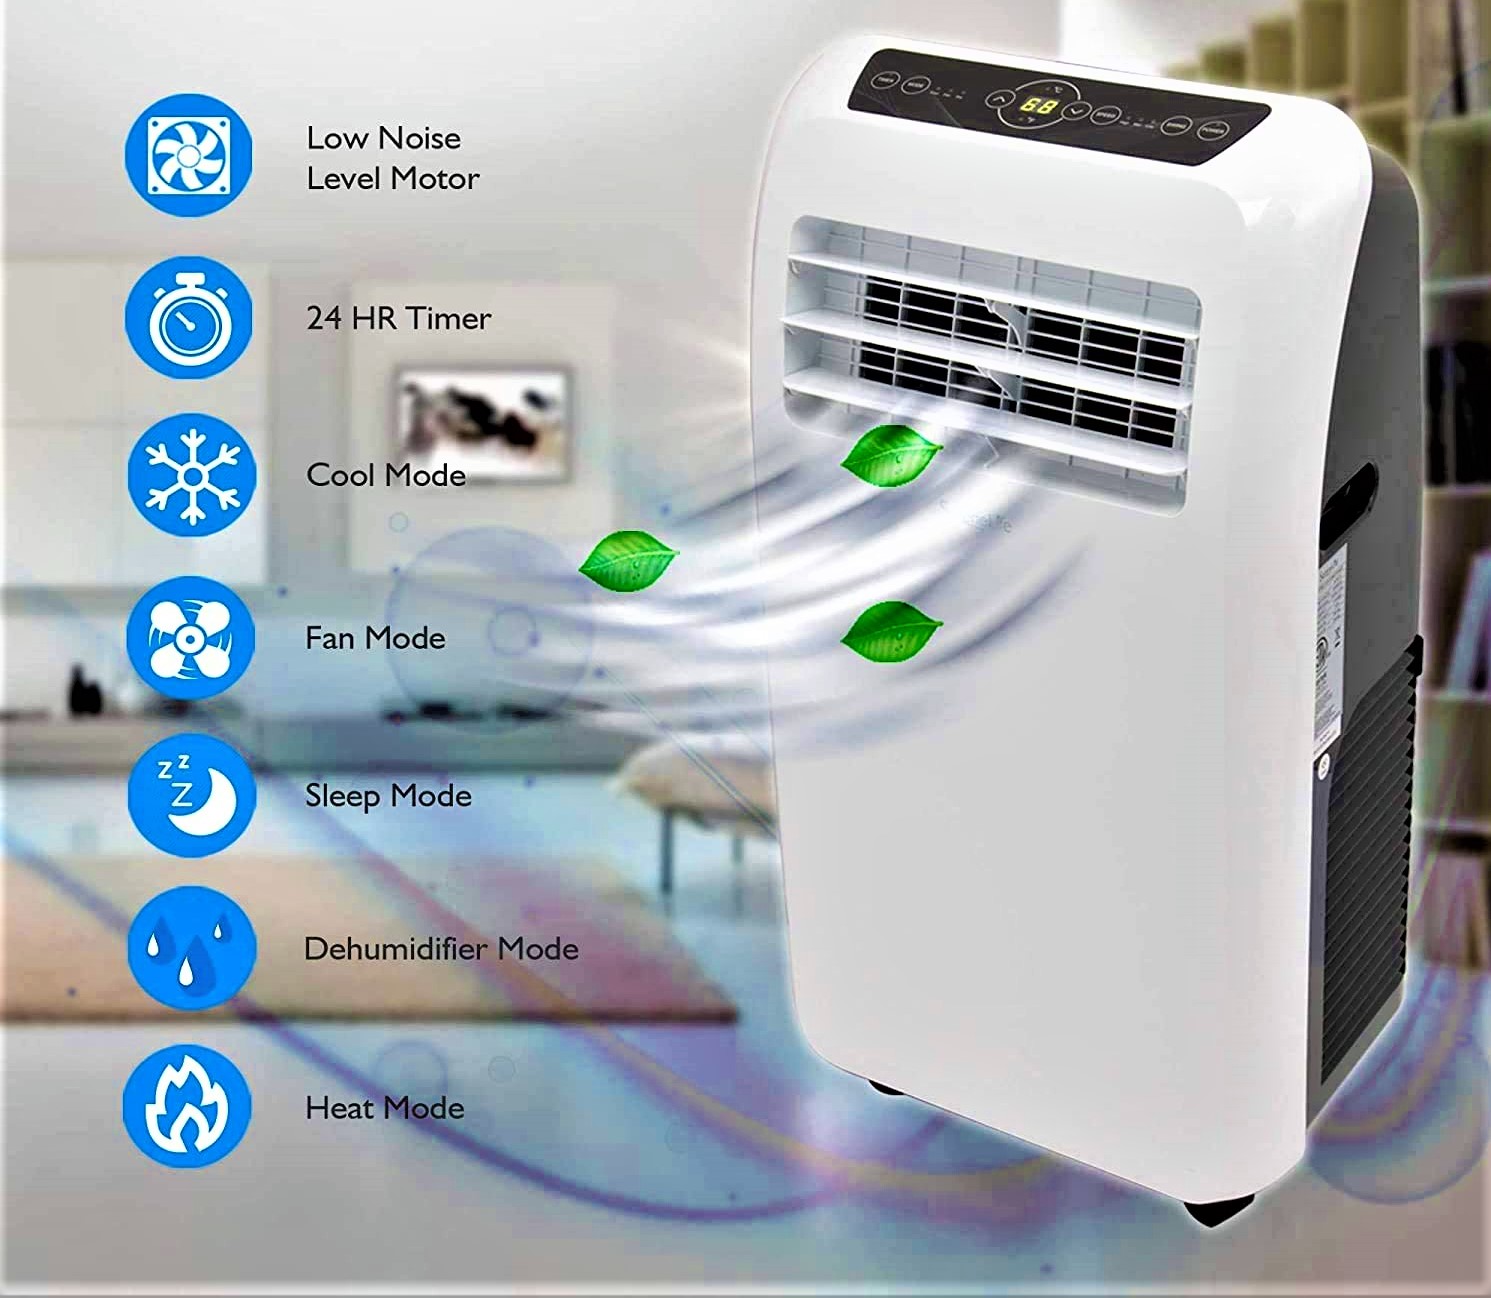 Portable Air Conditioner 12000 BTU SereneLife SLPAC Digital LED Display, 120V Power Supply, Heats Rooms up to 325’+ Sq Specs